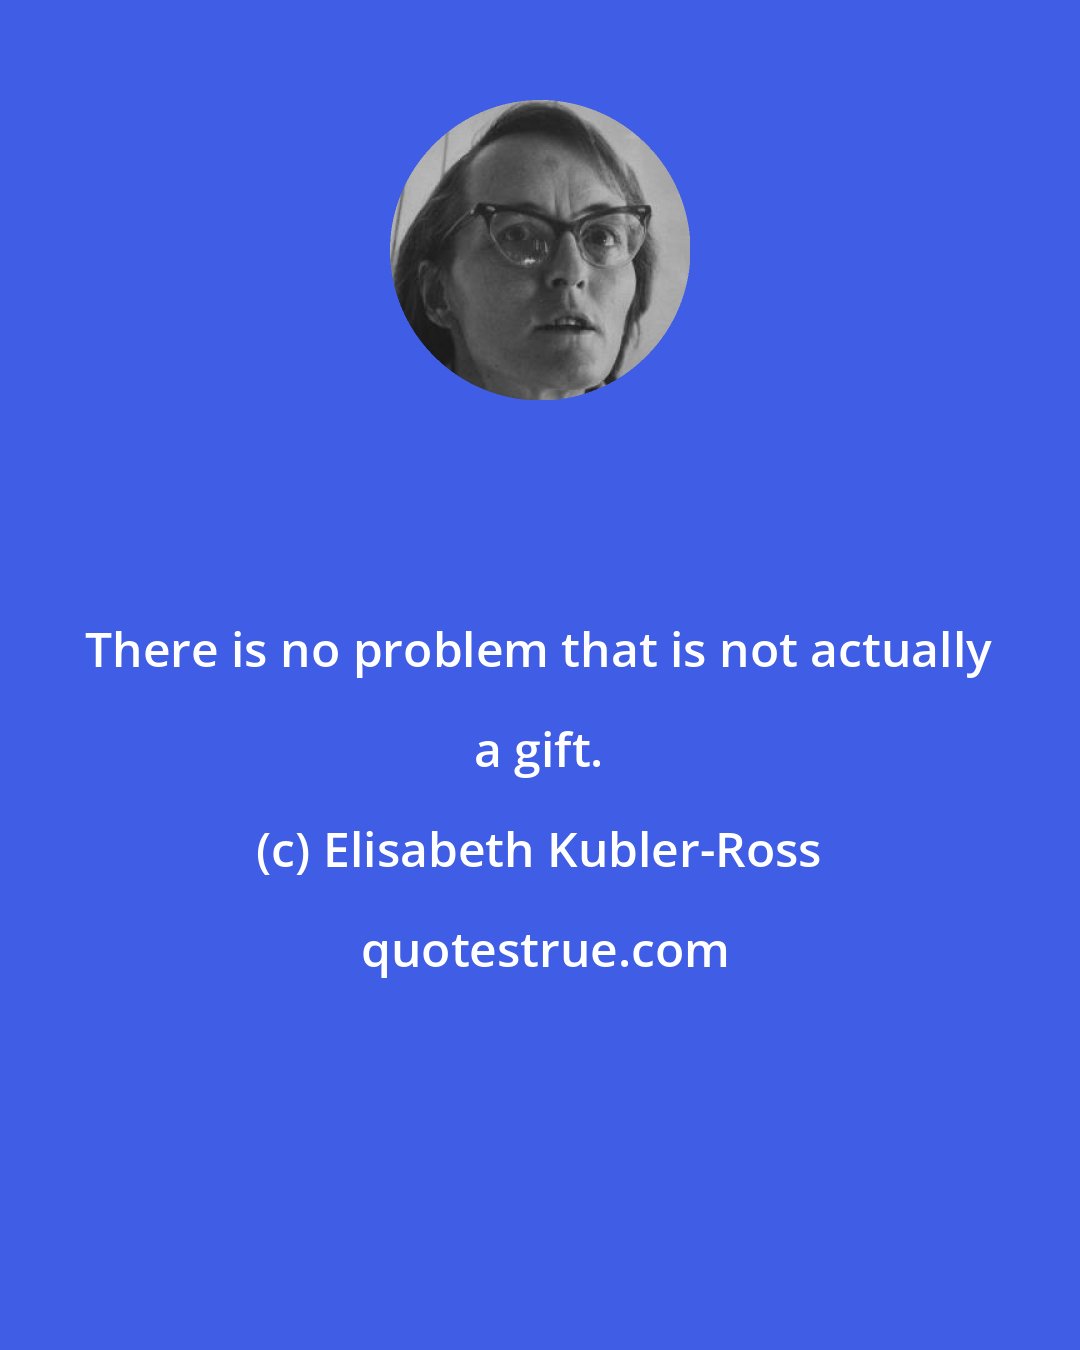 Elisabeth Kubler-Ross: There is no problem that is not actually a gift.